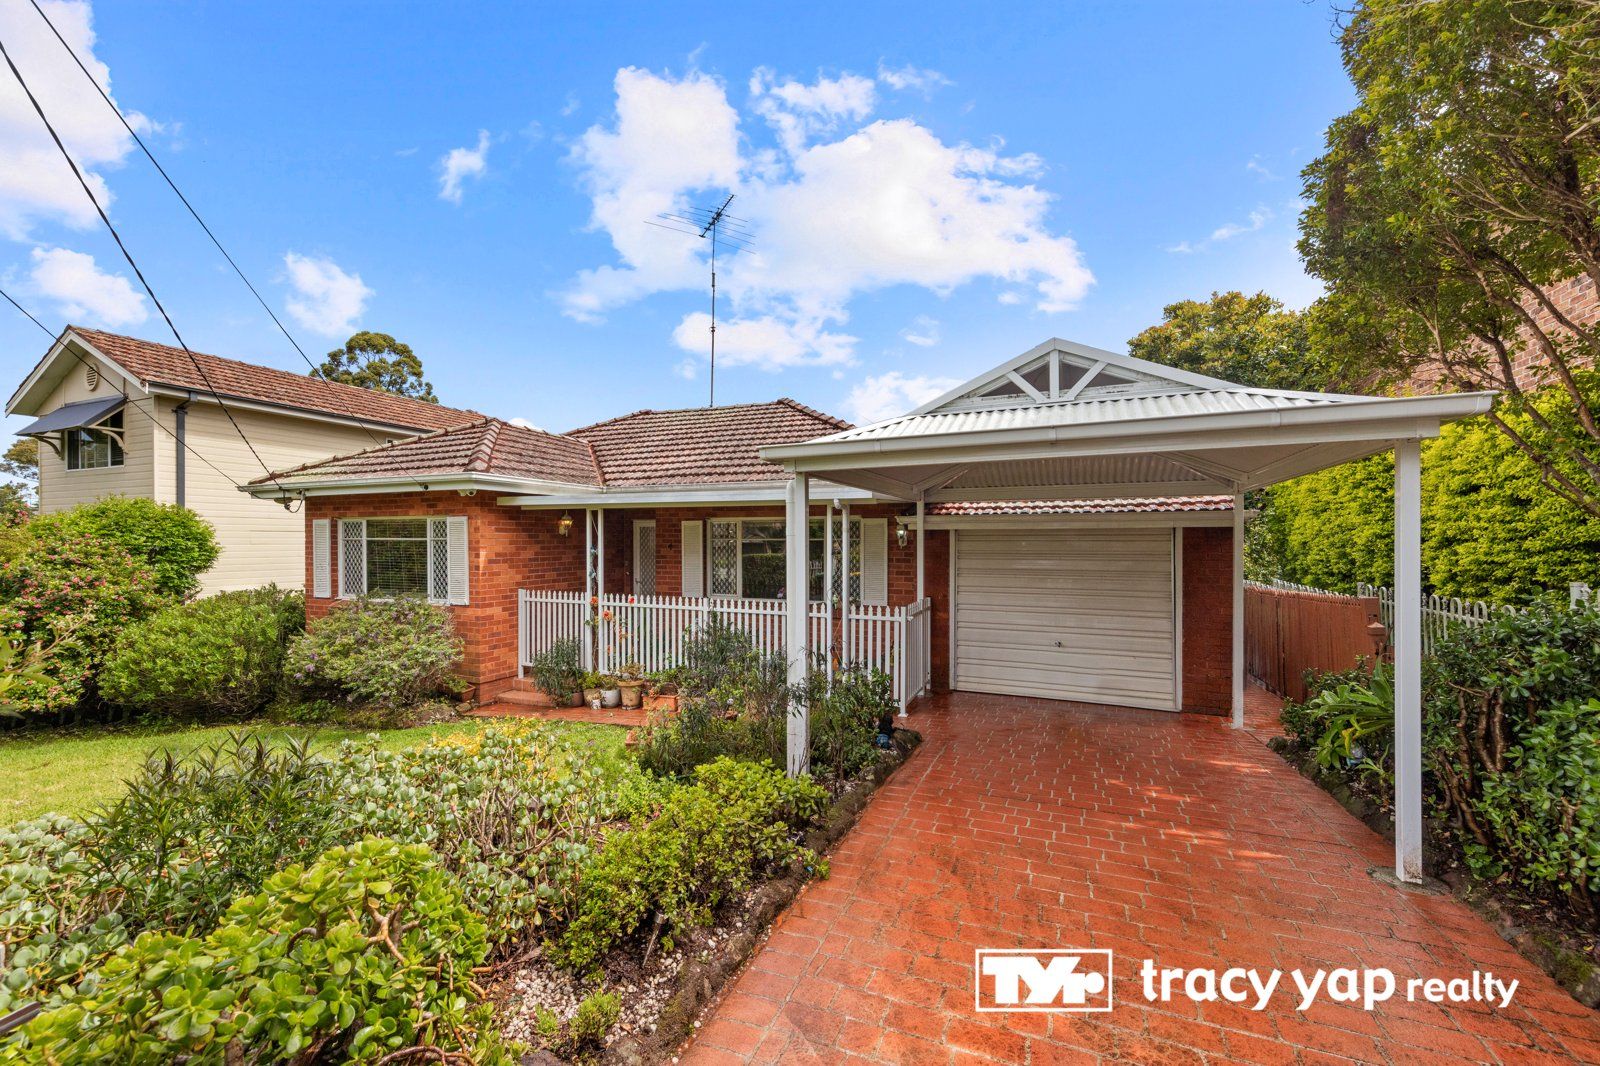 3 bedrooms House in 4 McKechnie Street EPPING NSW, 2121